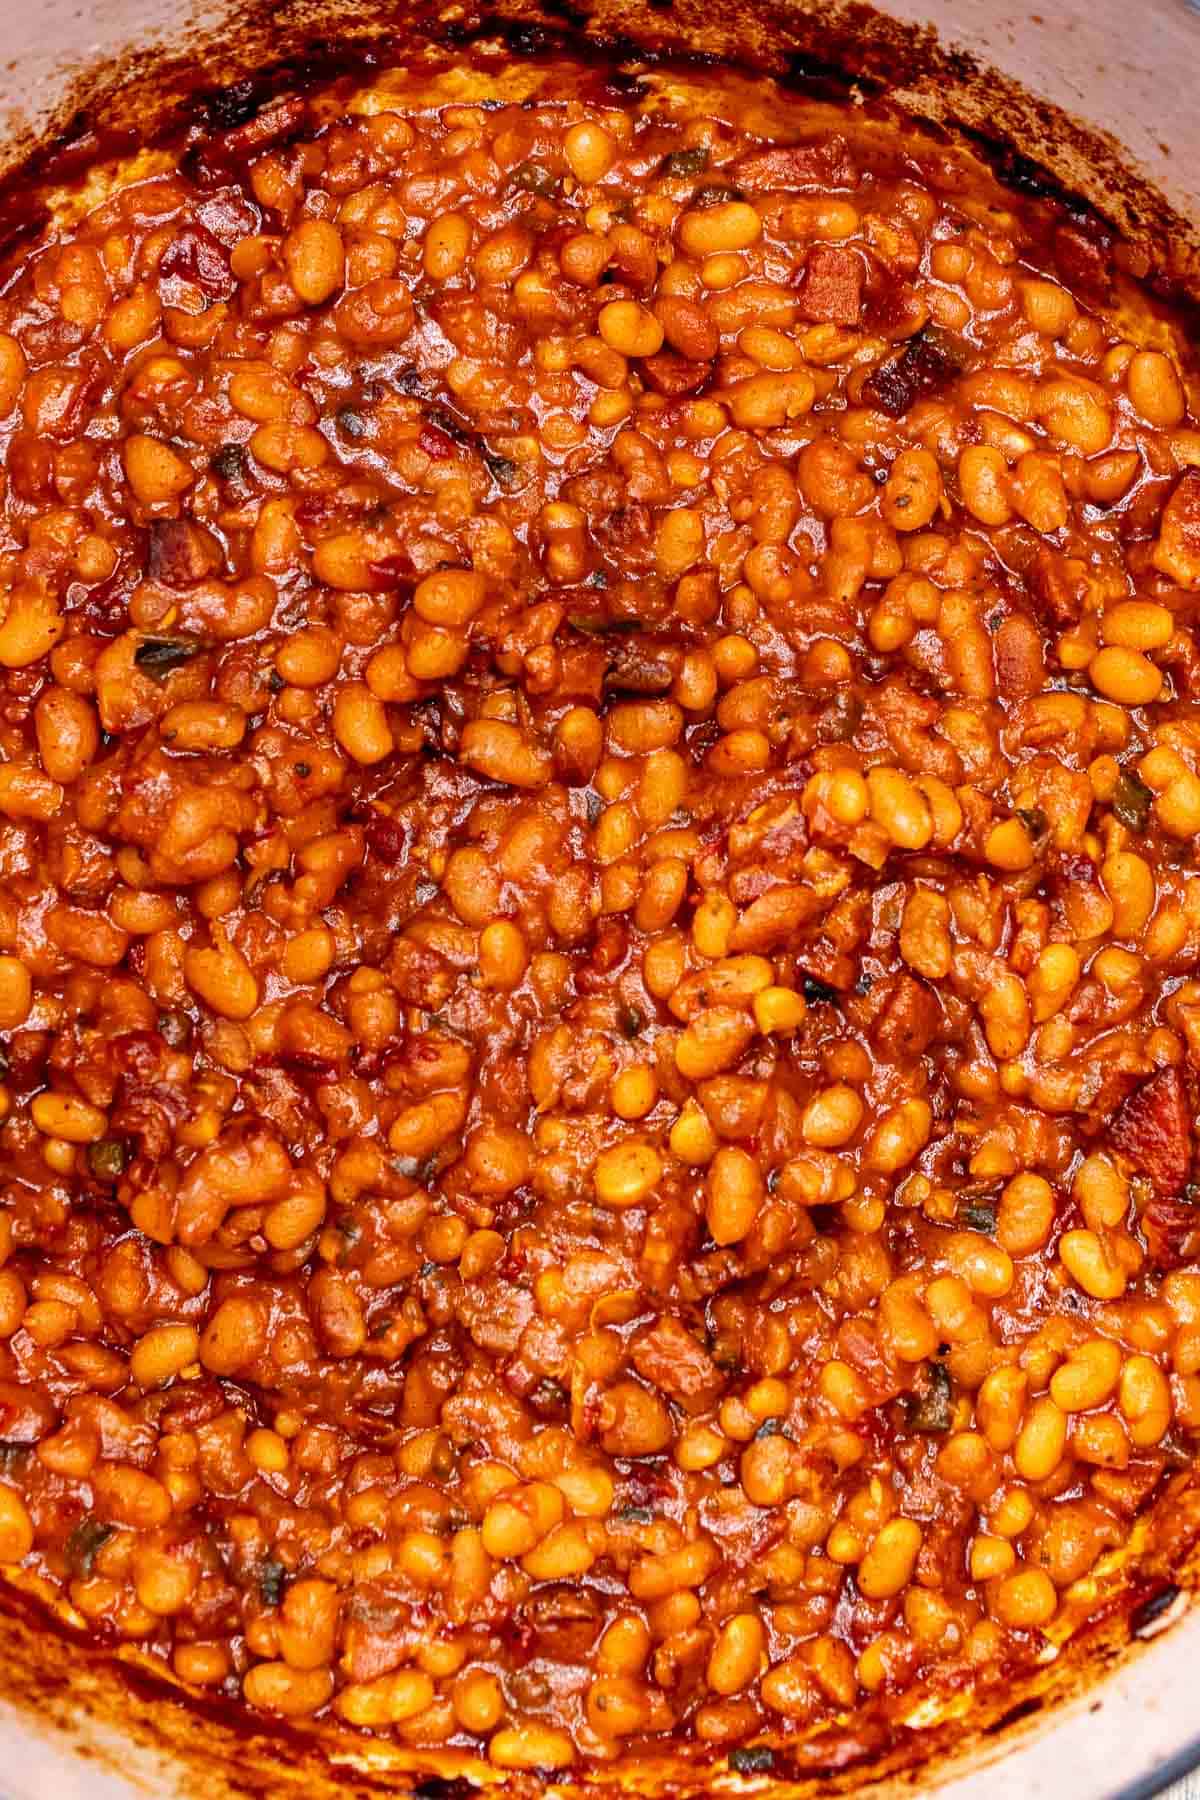 The baked beans after finishing cooking.